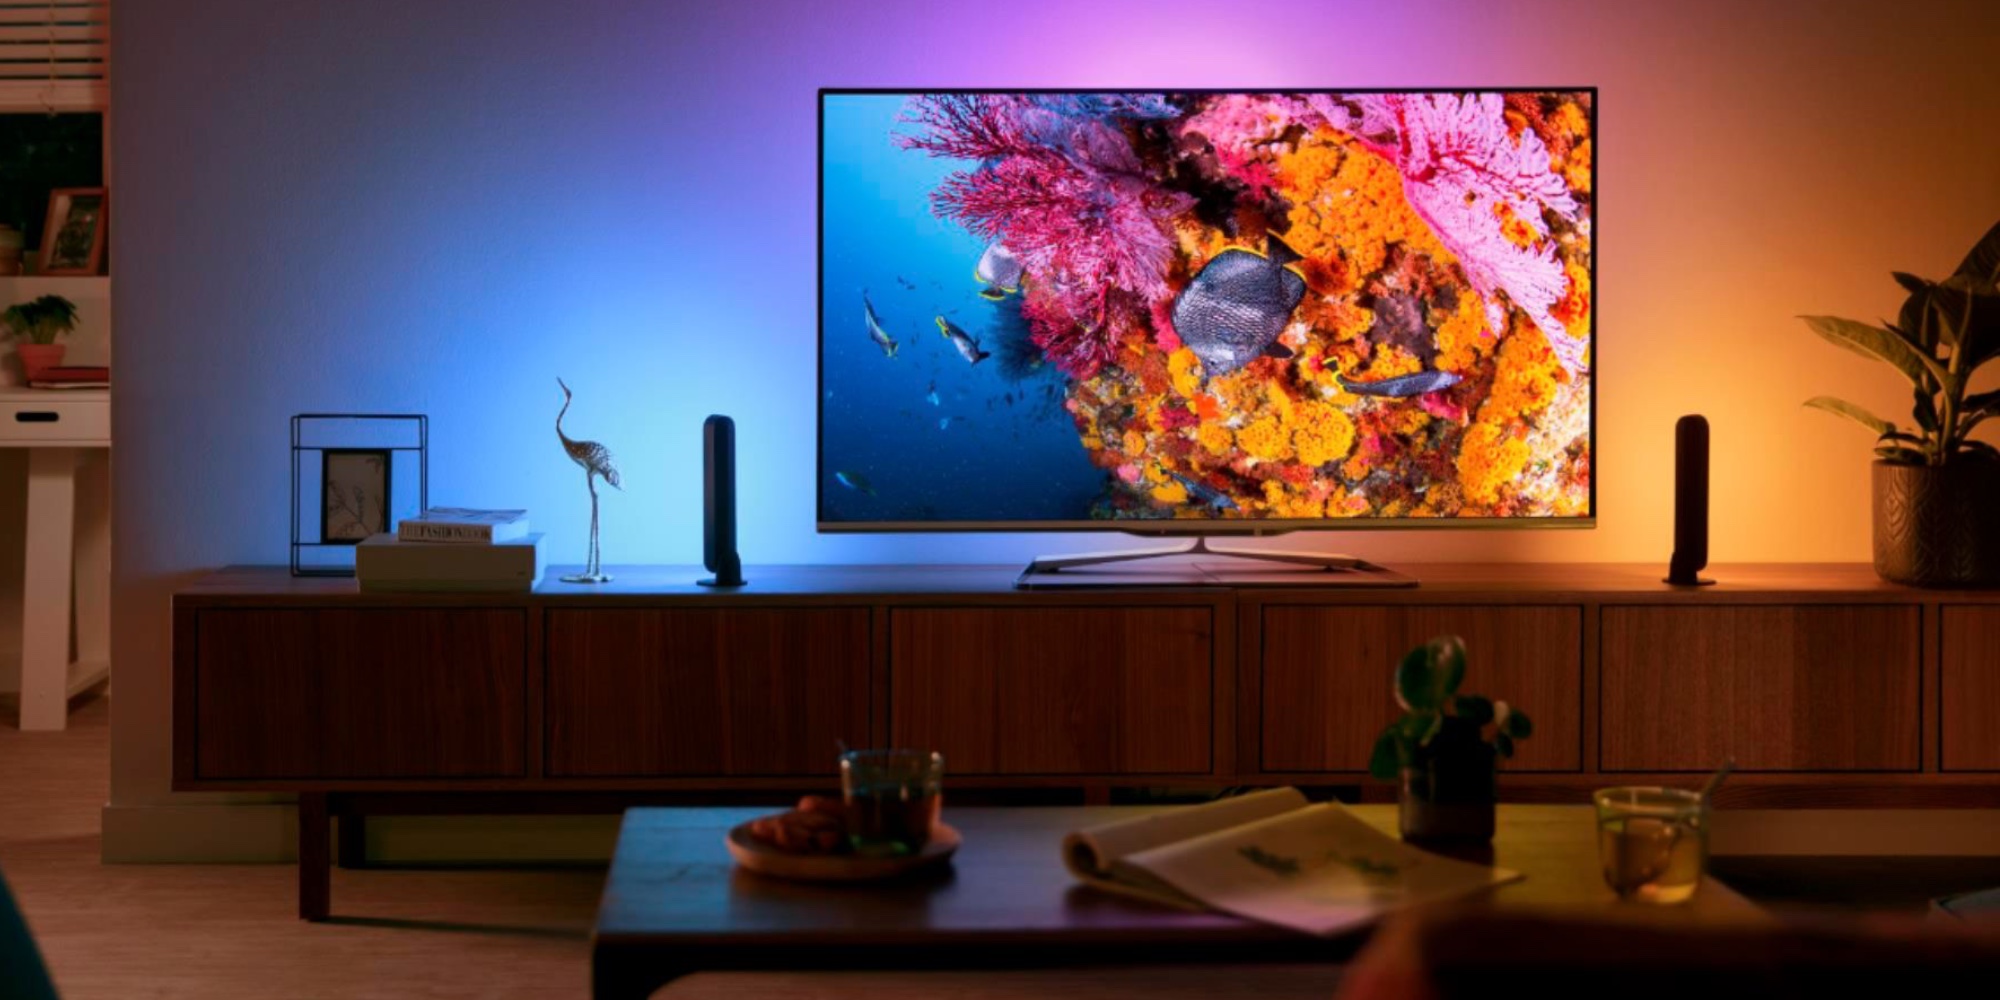 Hue refurb sale live on light strips, TV Sync Box, from $18 -